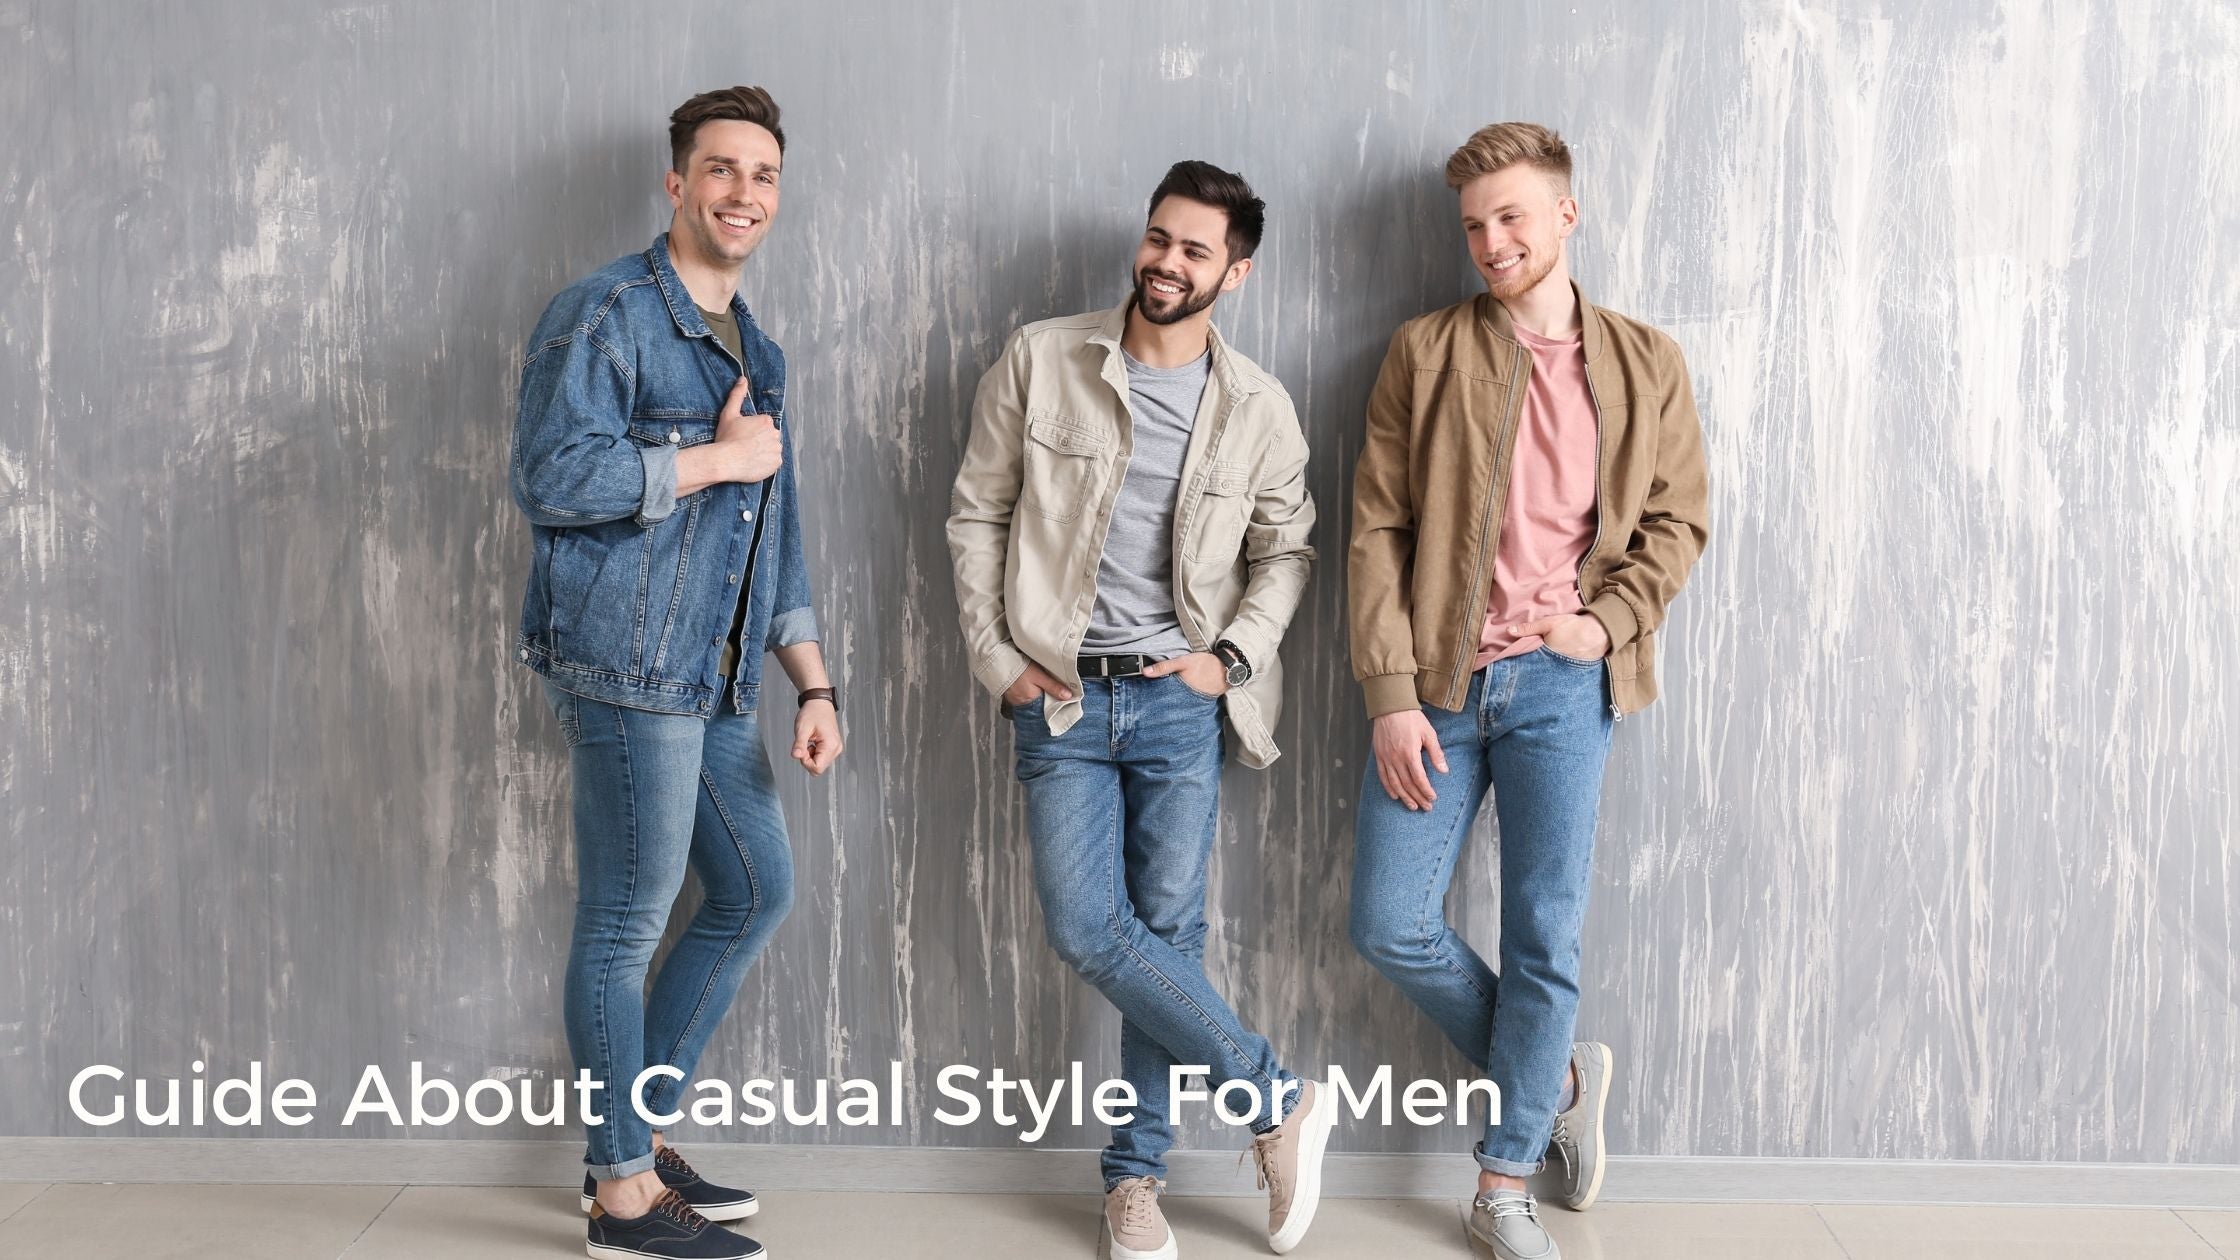 Guide About Casual Style For Men